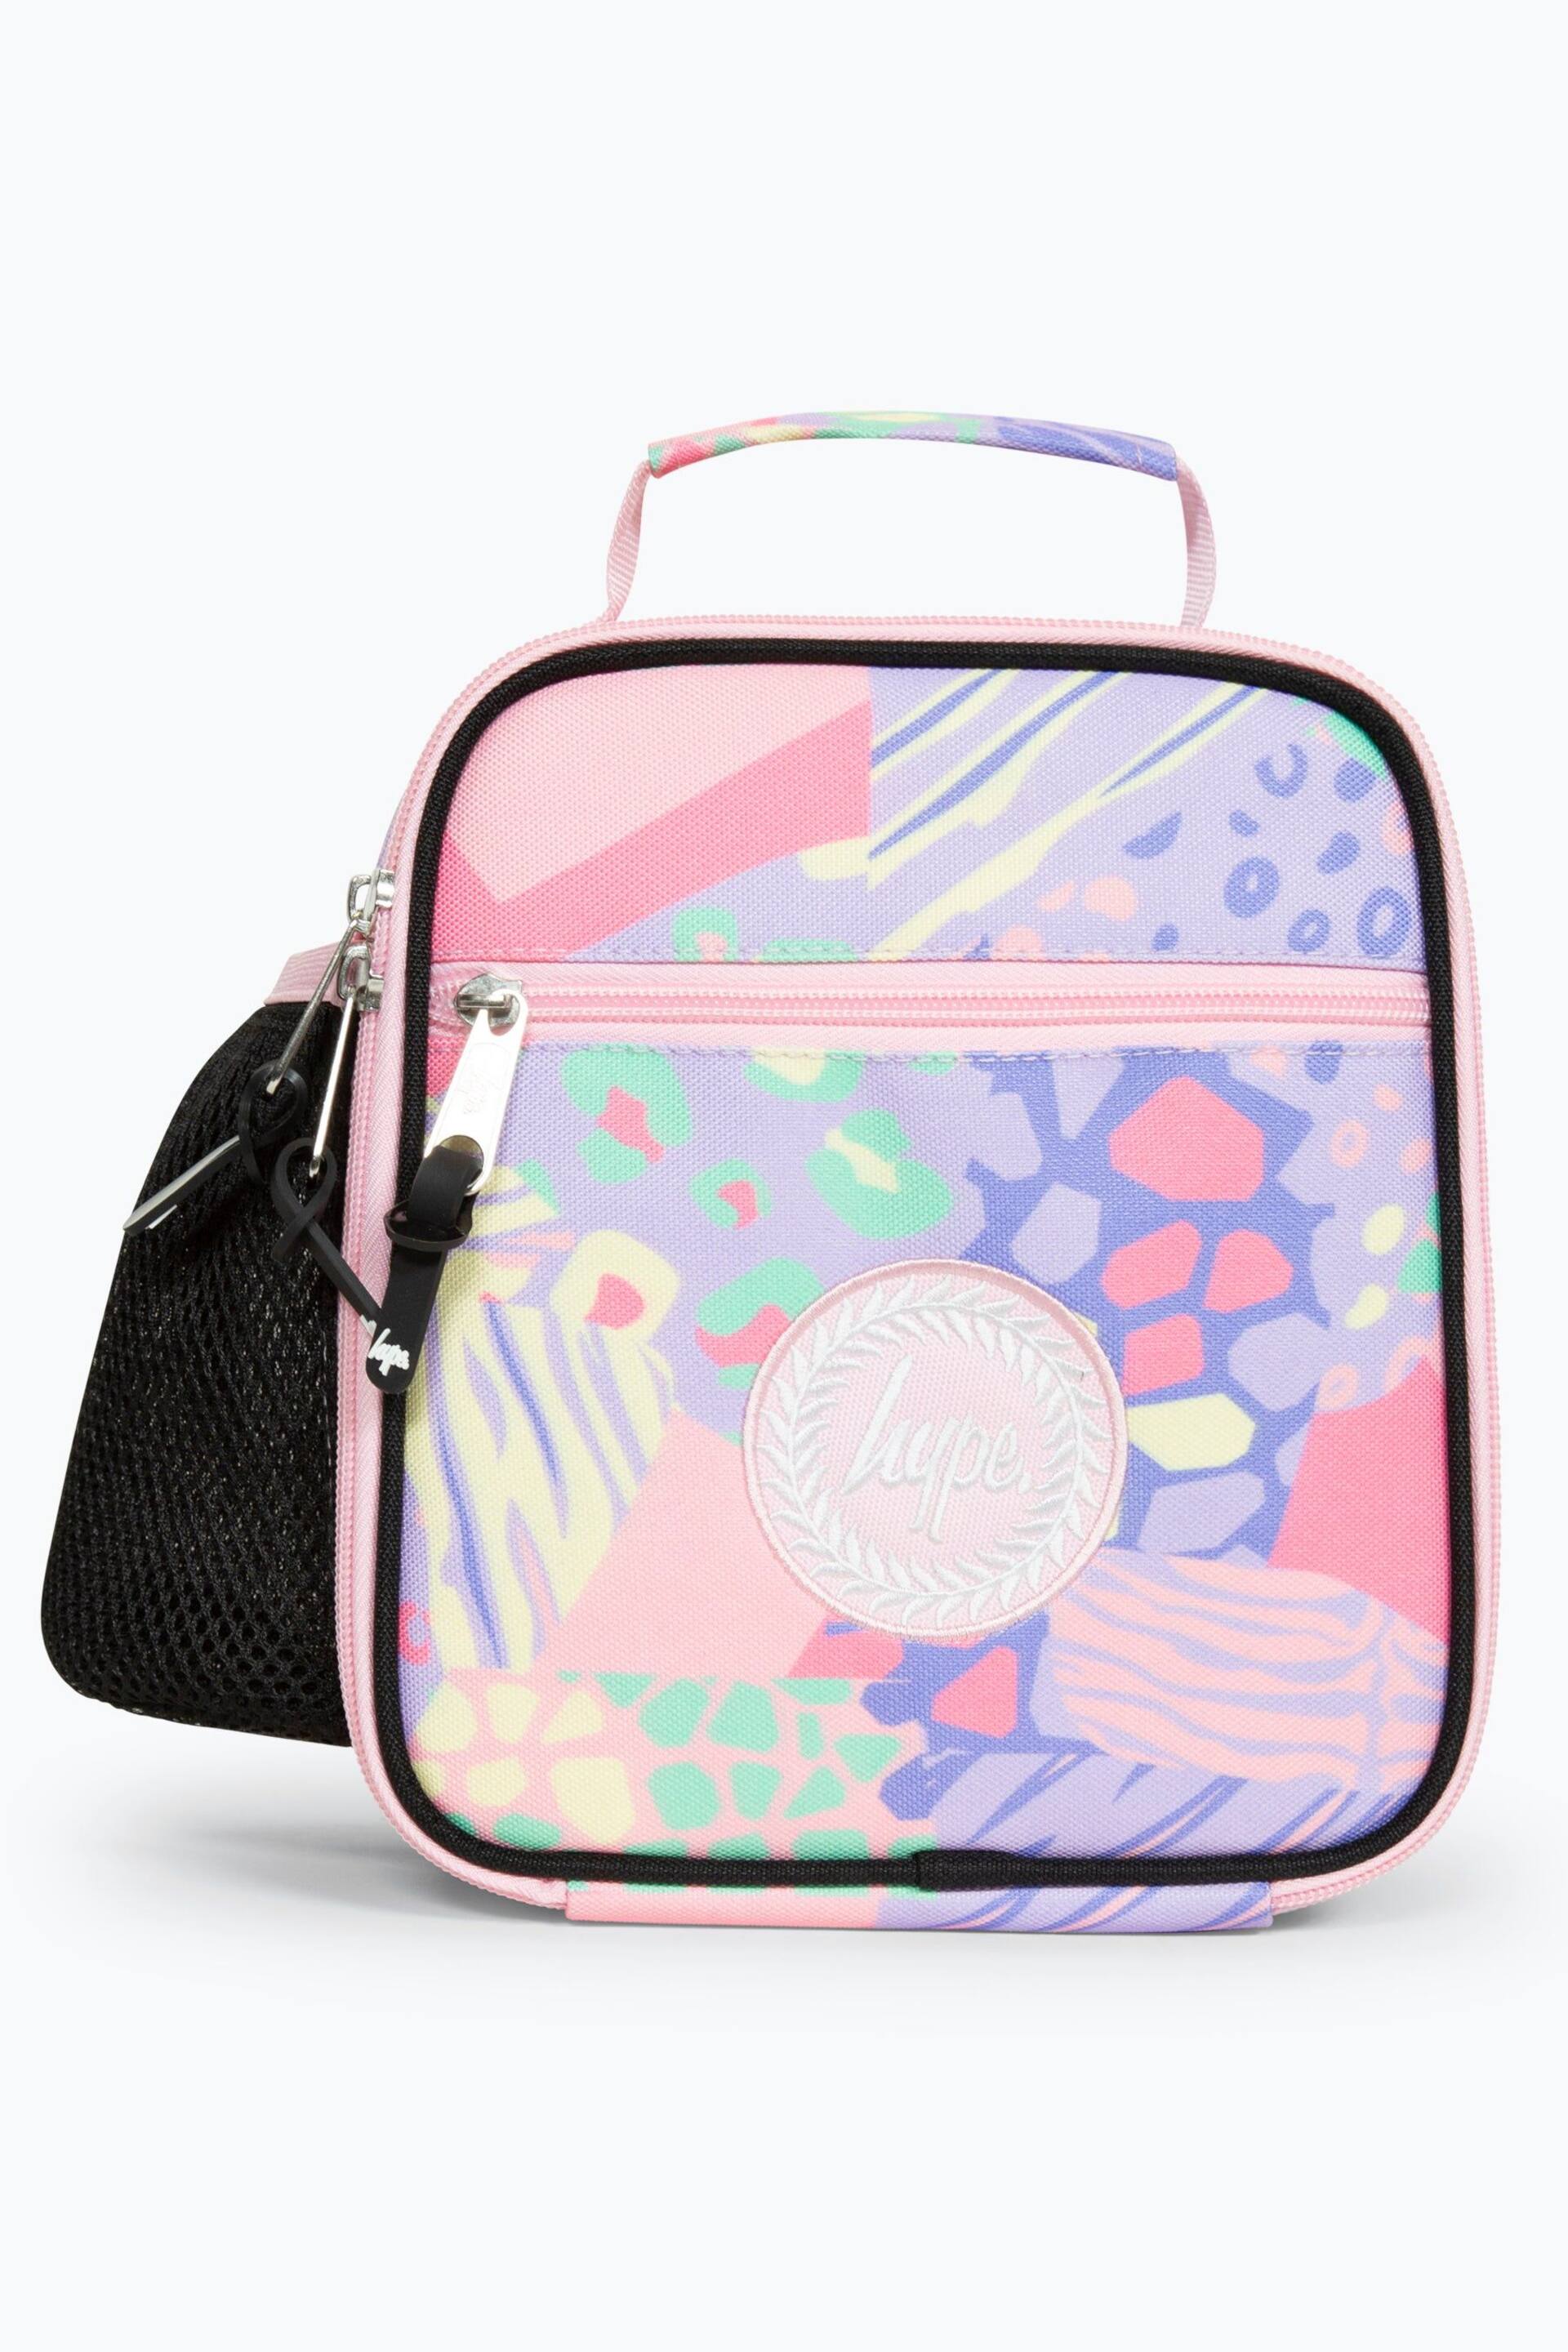 Hype. Multi Pastel Prints Lunch Box - Image 1 of 9